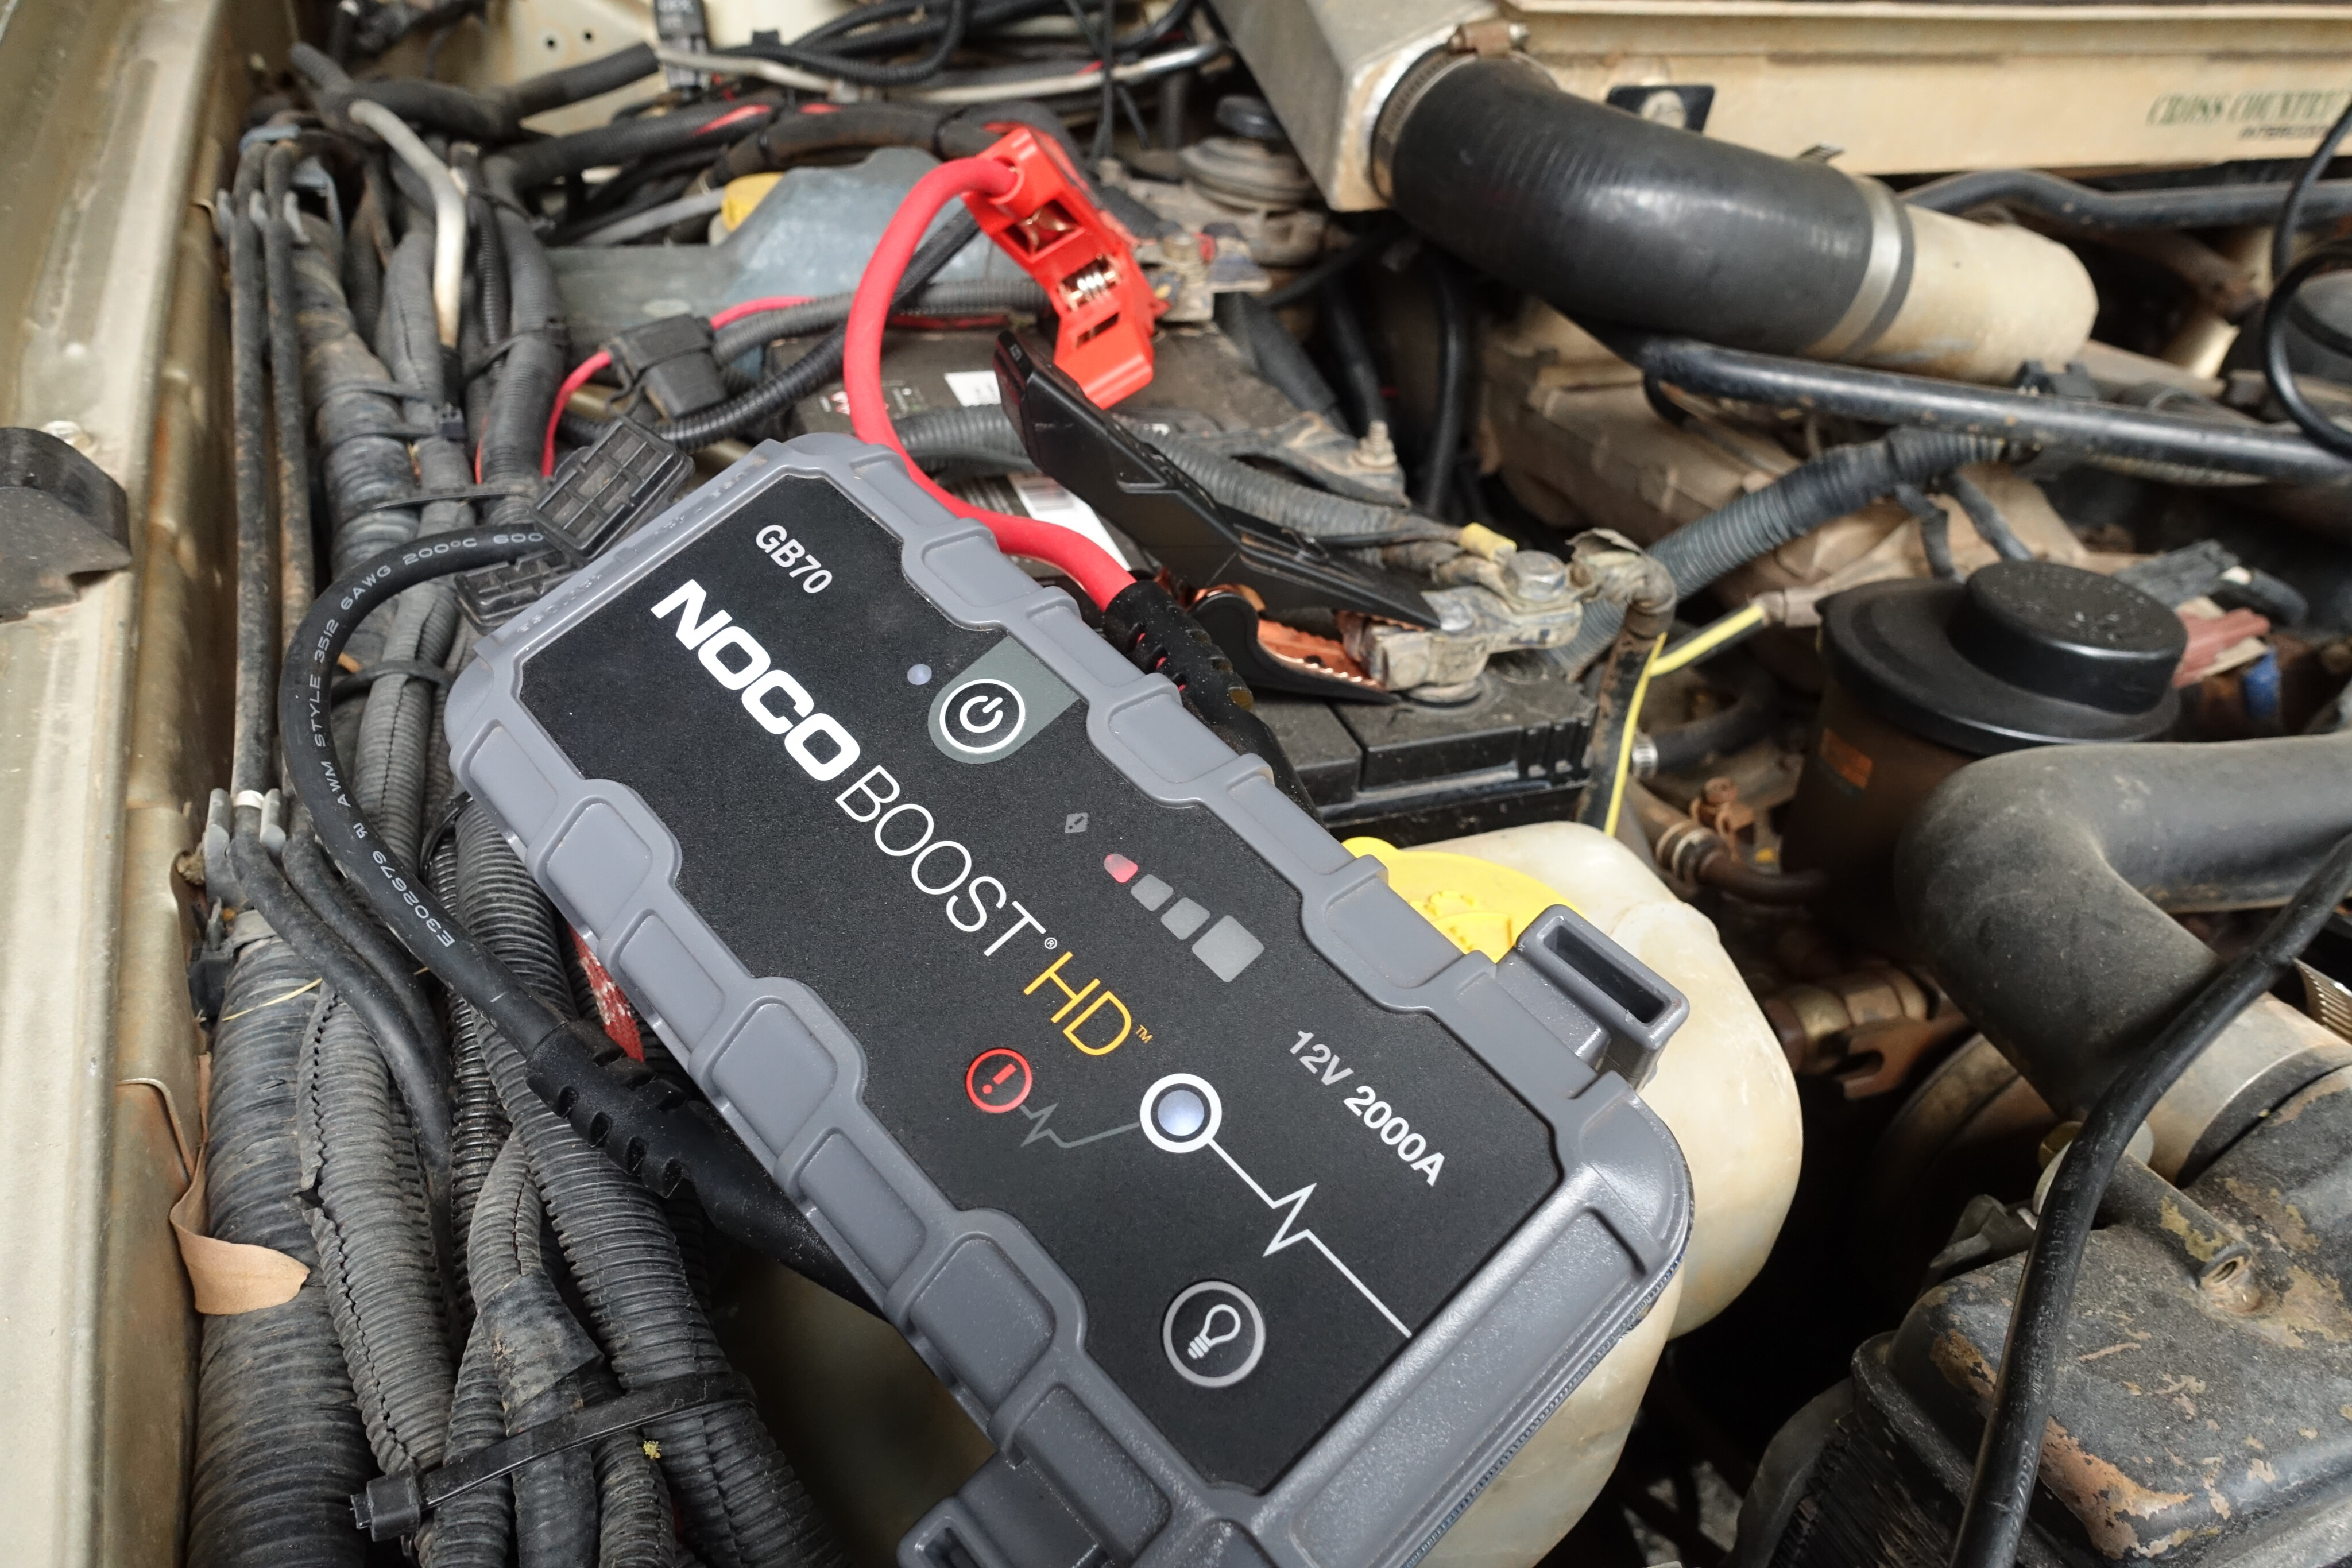 NoCo GB70 jump starter review